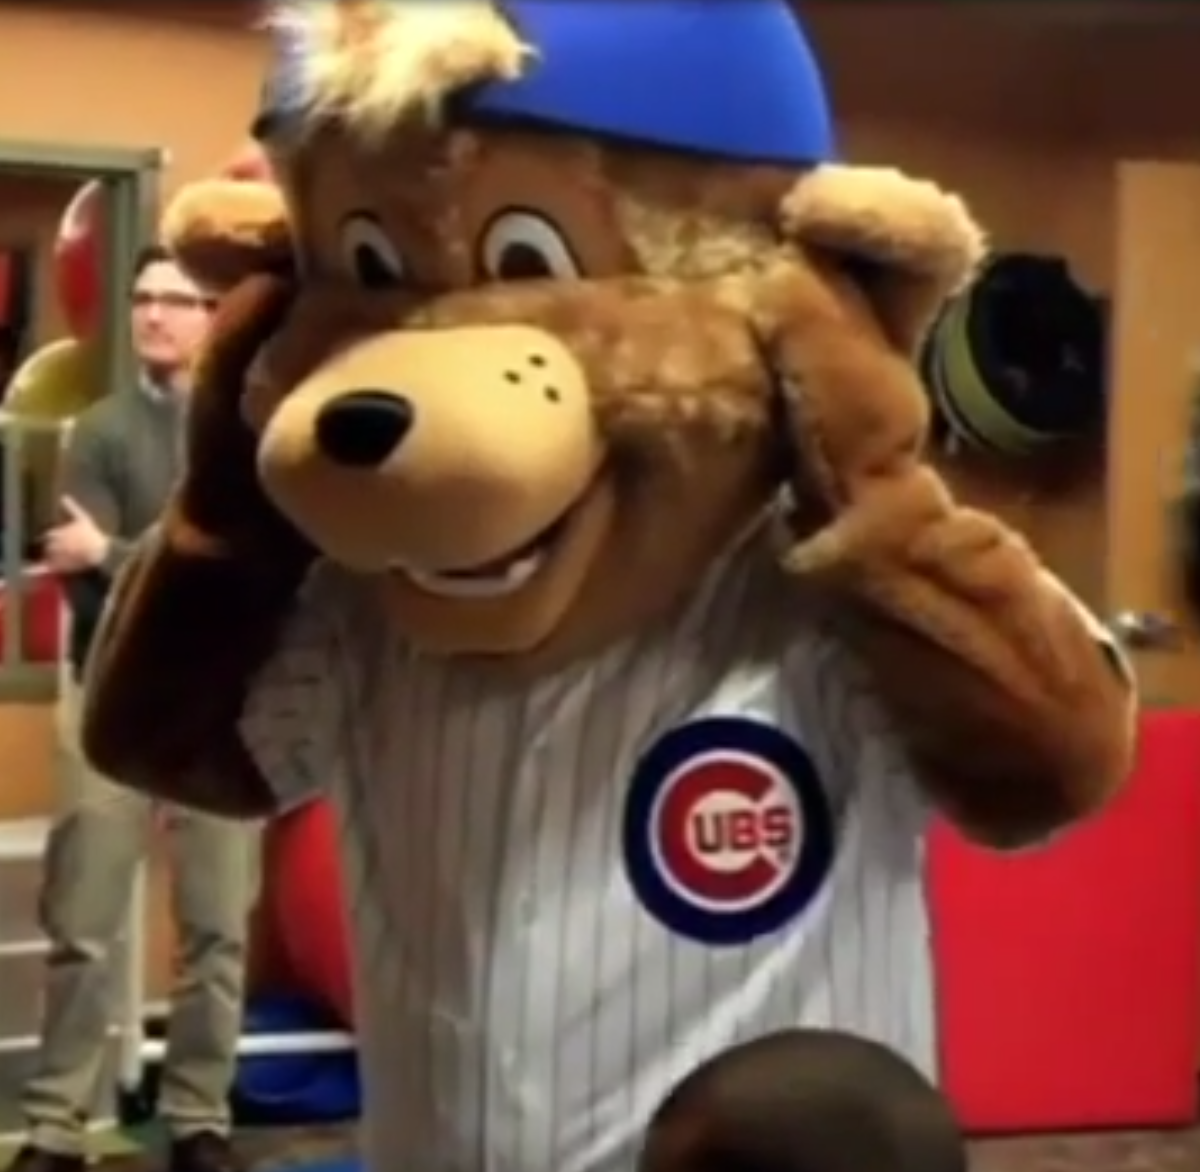 Comcast SportsNet Accidentally Airs NSFW Image of Cubs Mascot